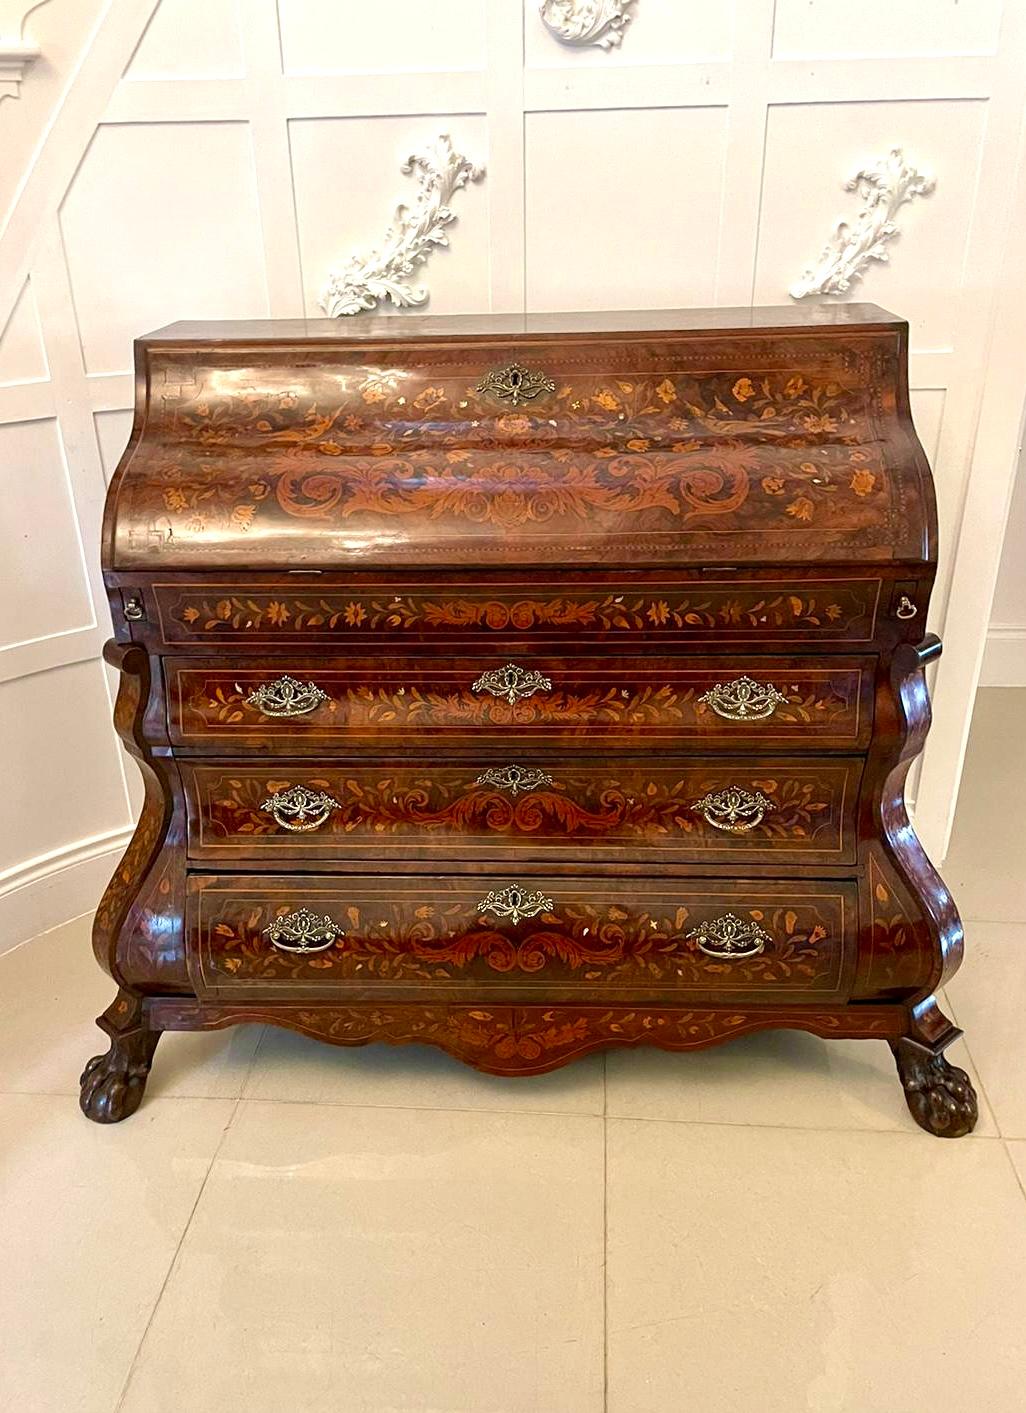 Antique Quality Burr Walnut Floral Marquetry Inlaid Bombe Shaped Bureau In Good Condition For Sale In Suffolk, GB